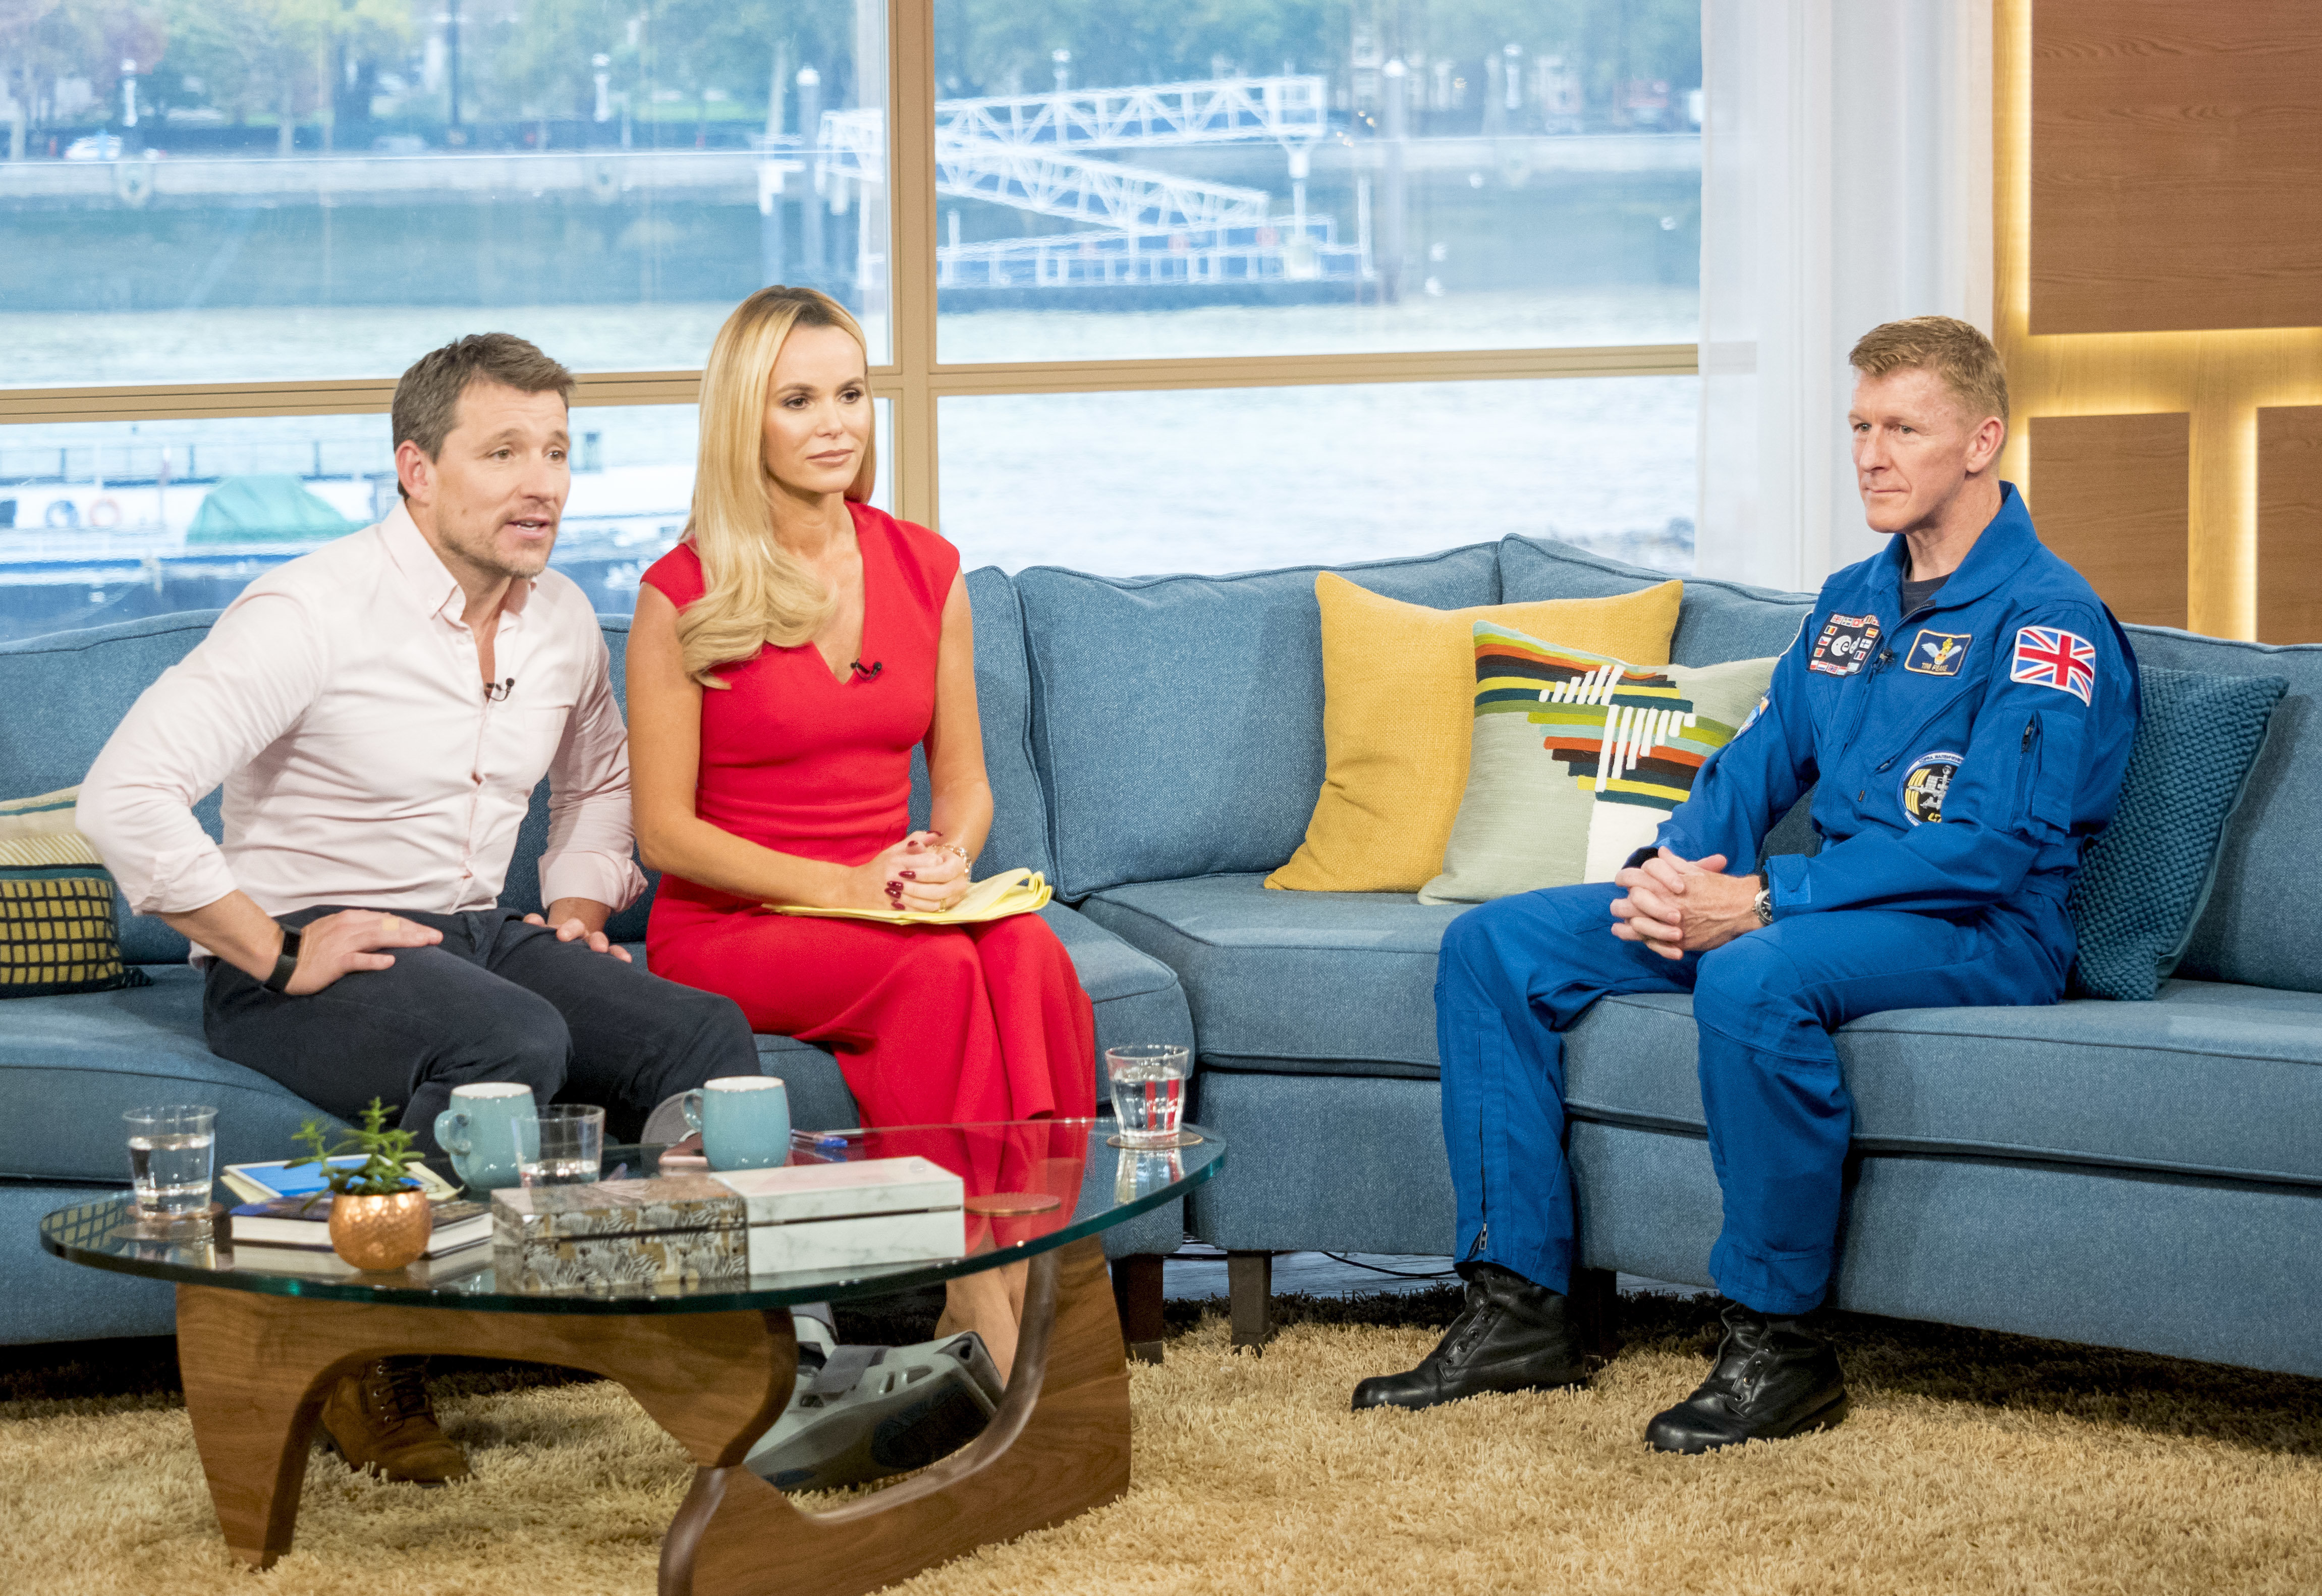 <strong>'This Morning' hosts Ben Shephard and Amanda Holden interviewed Tim Peake on Thursday's show.</strong>